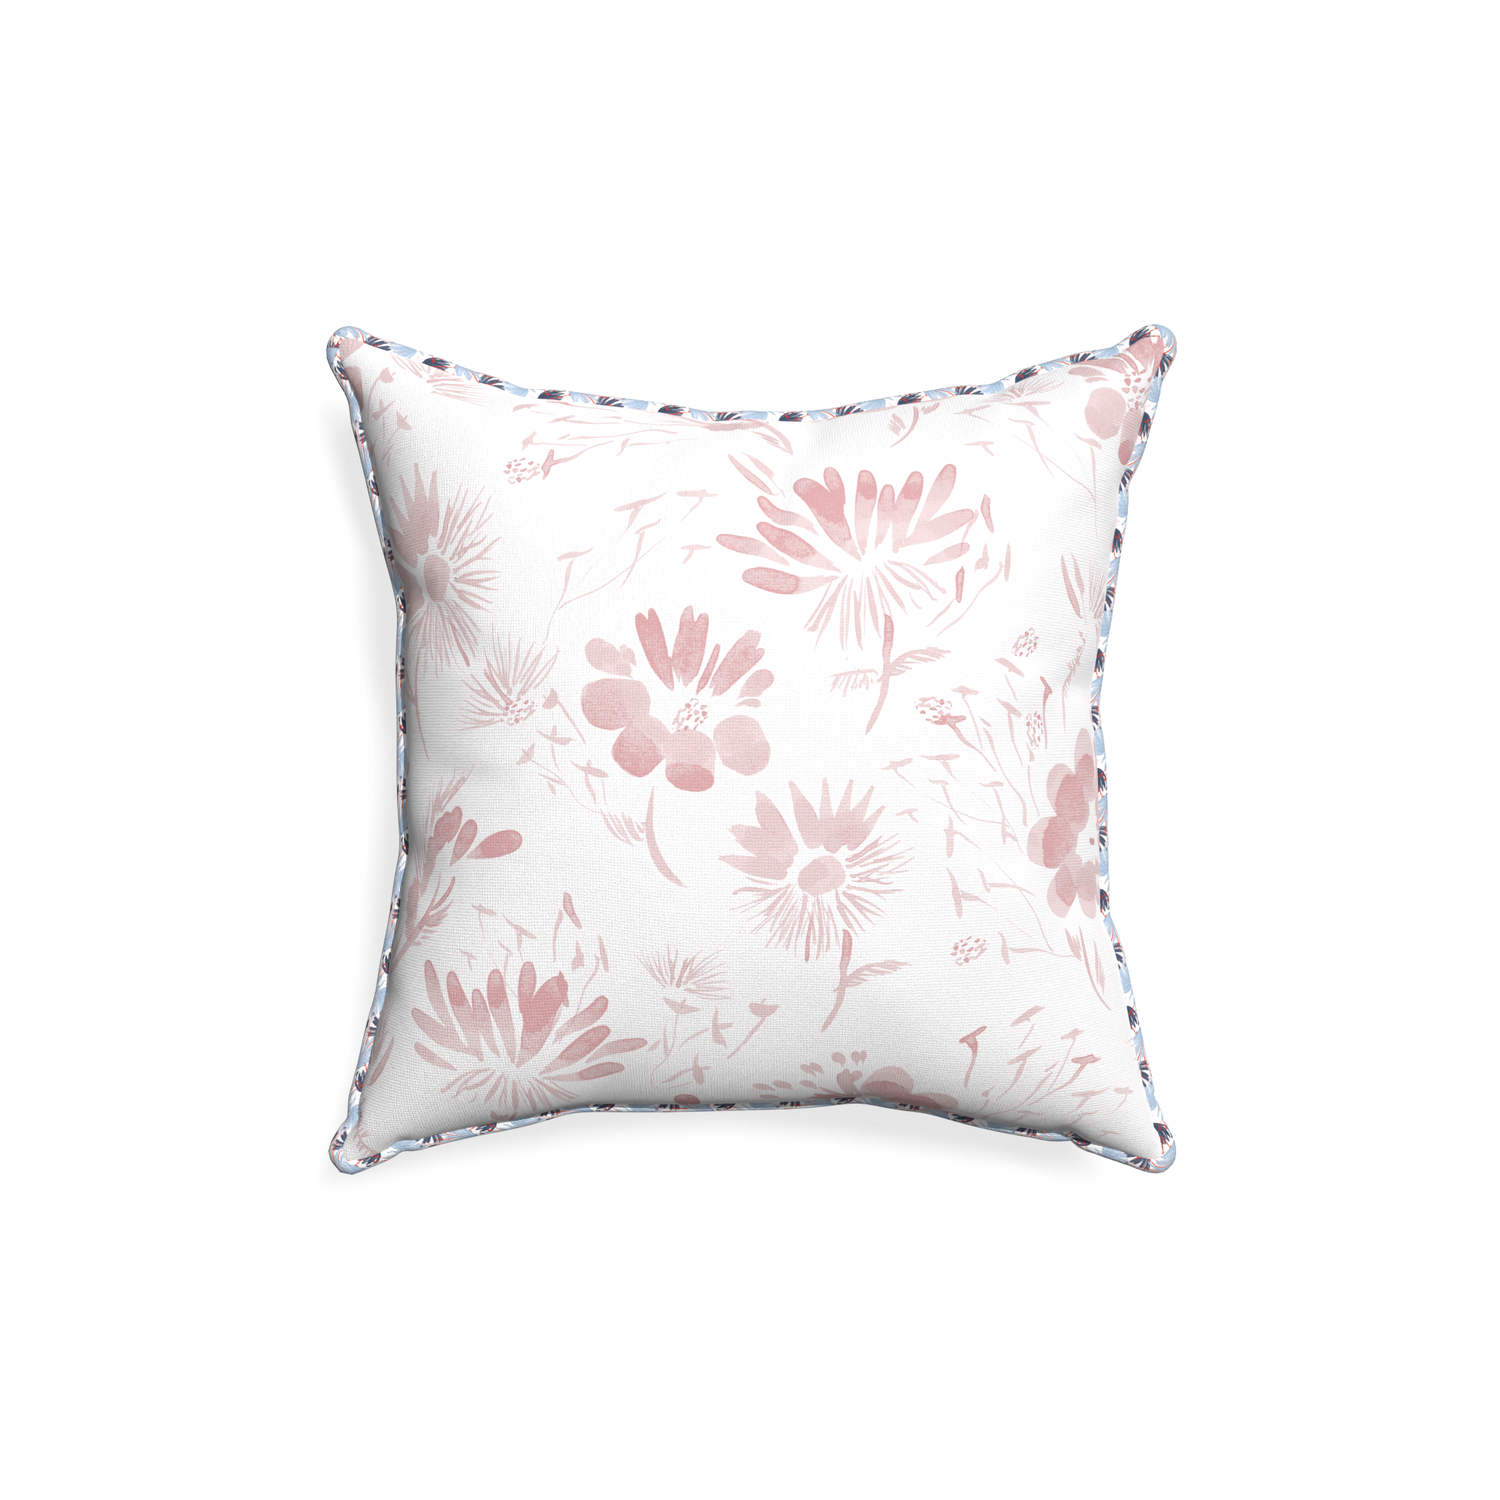 18-square blake custom pillow with e piping on white background